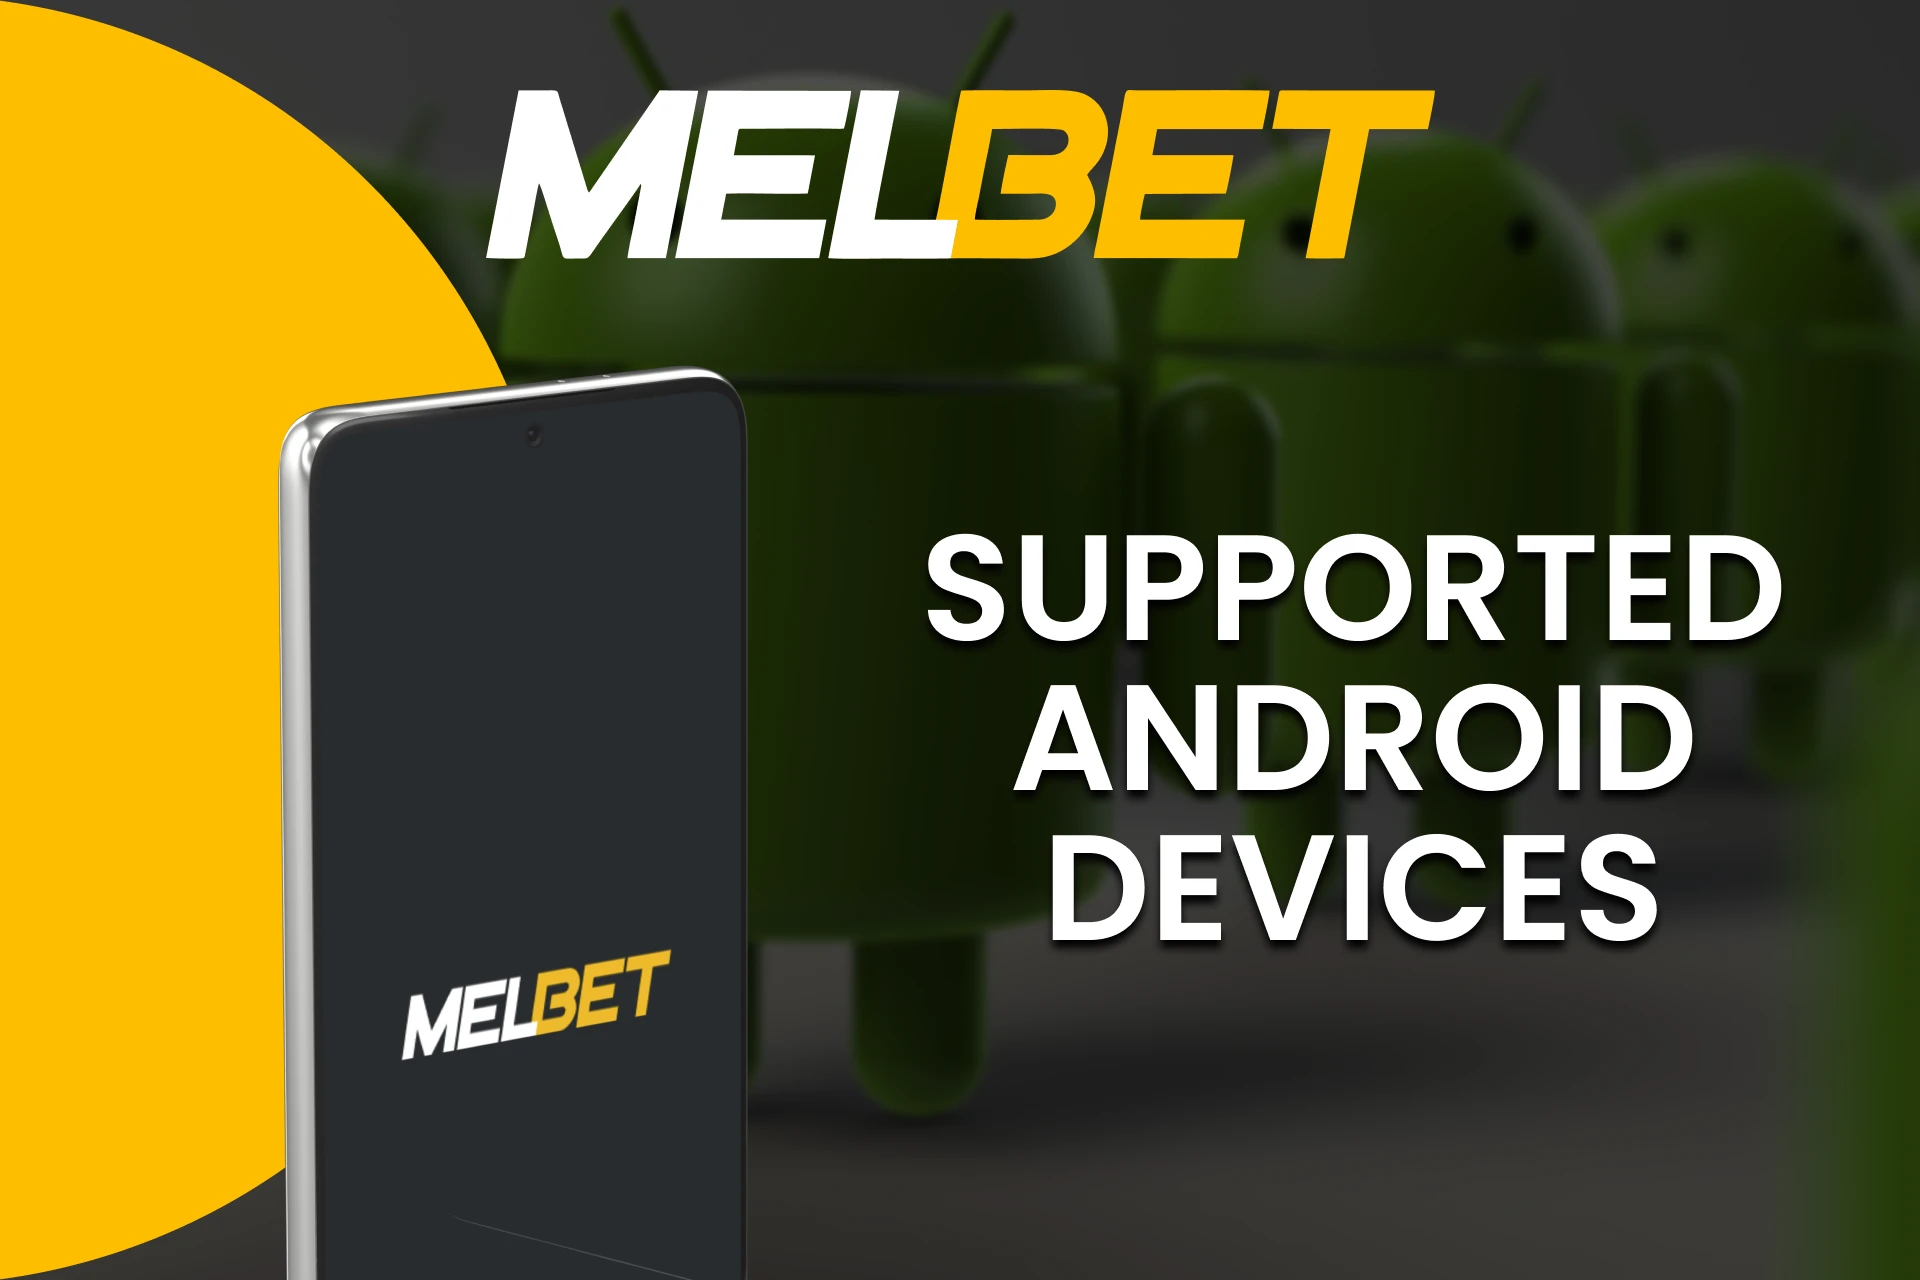 All Android devices are supported by the Melbet app.